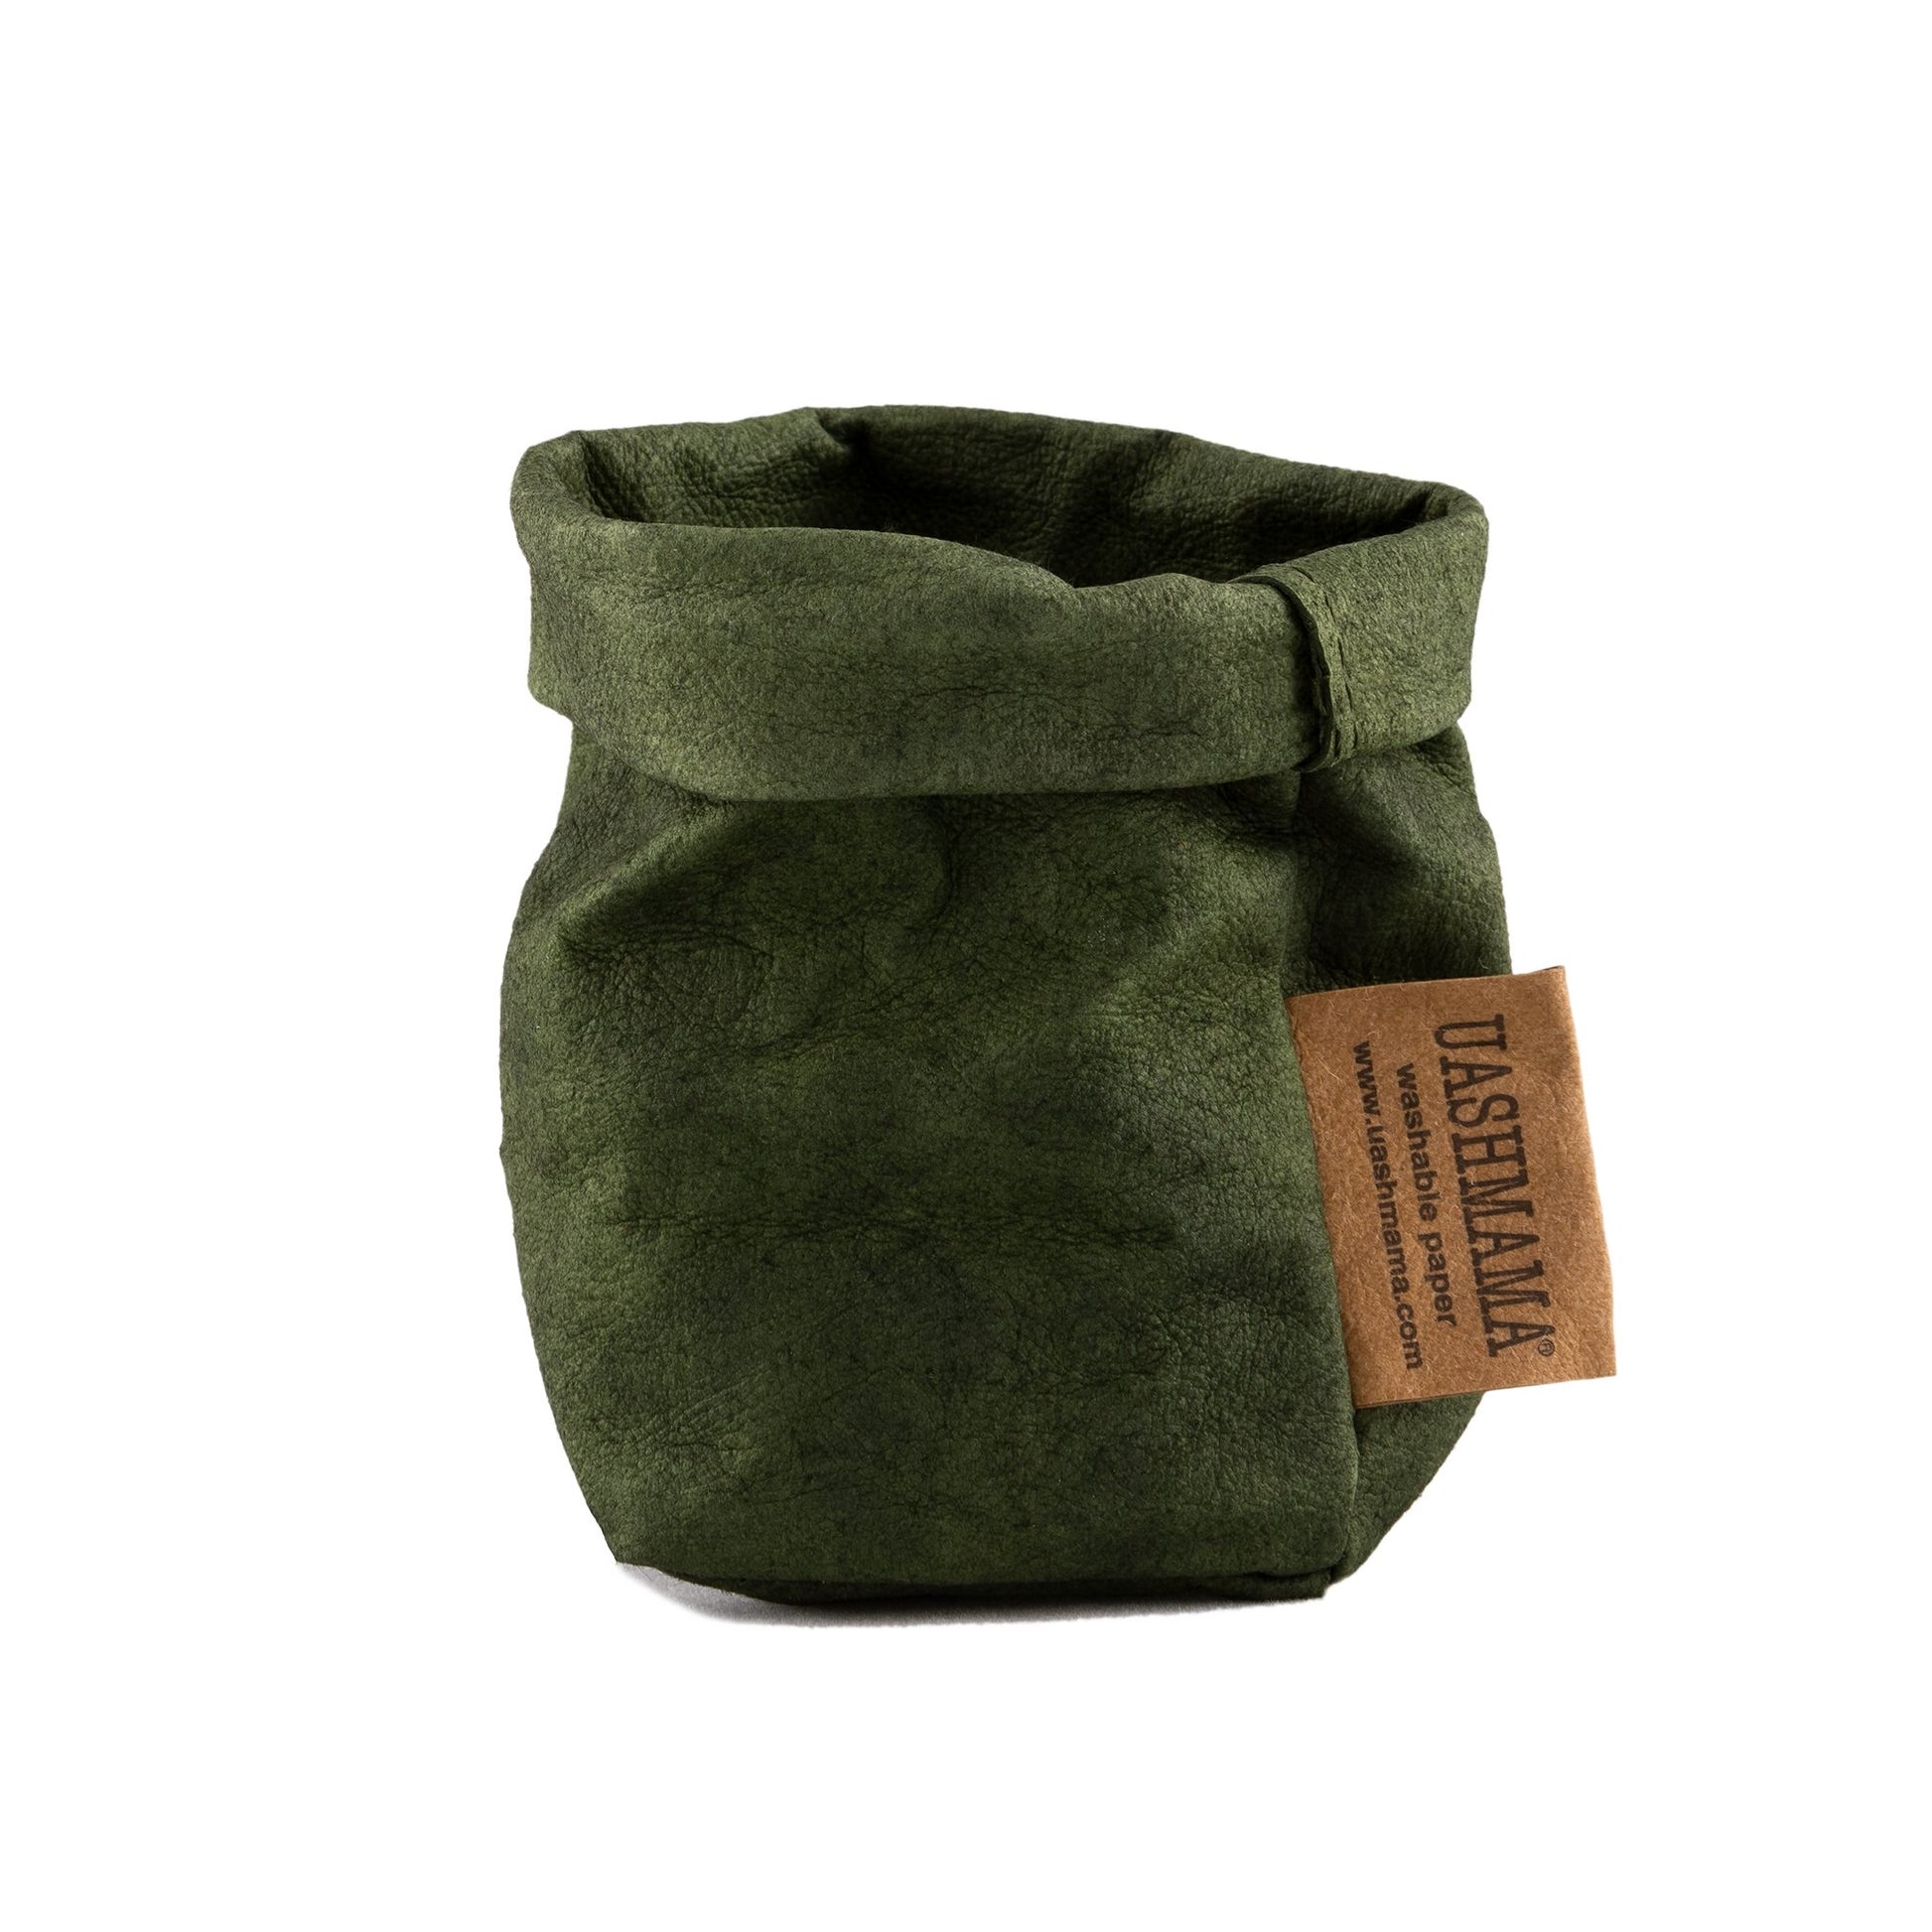 A washable paper bag is shown. The bag is rolled down at the top and features a UASHMAMA logo label on the bottom left corner. The bag pictured is the extra small size in dark green.